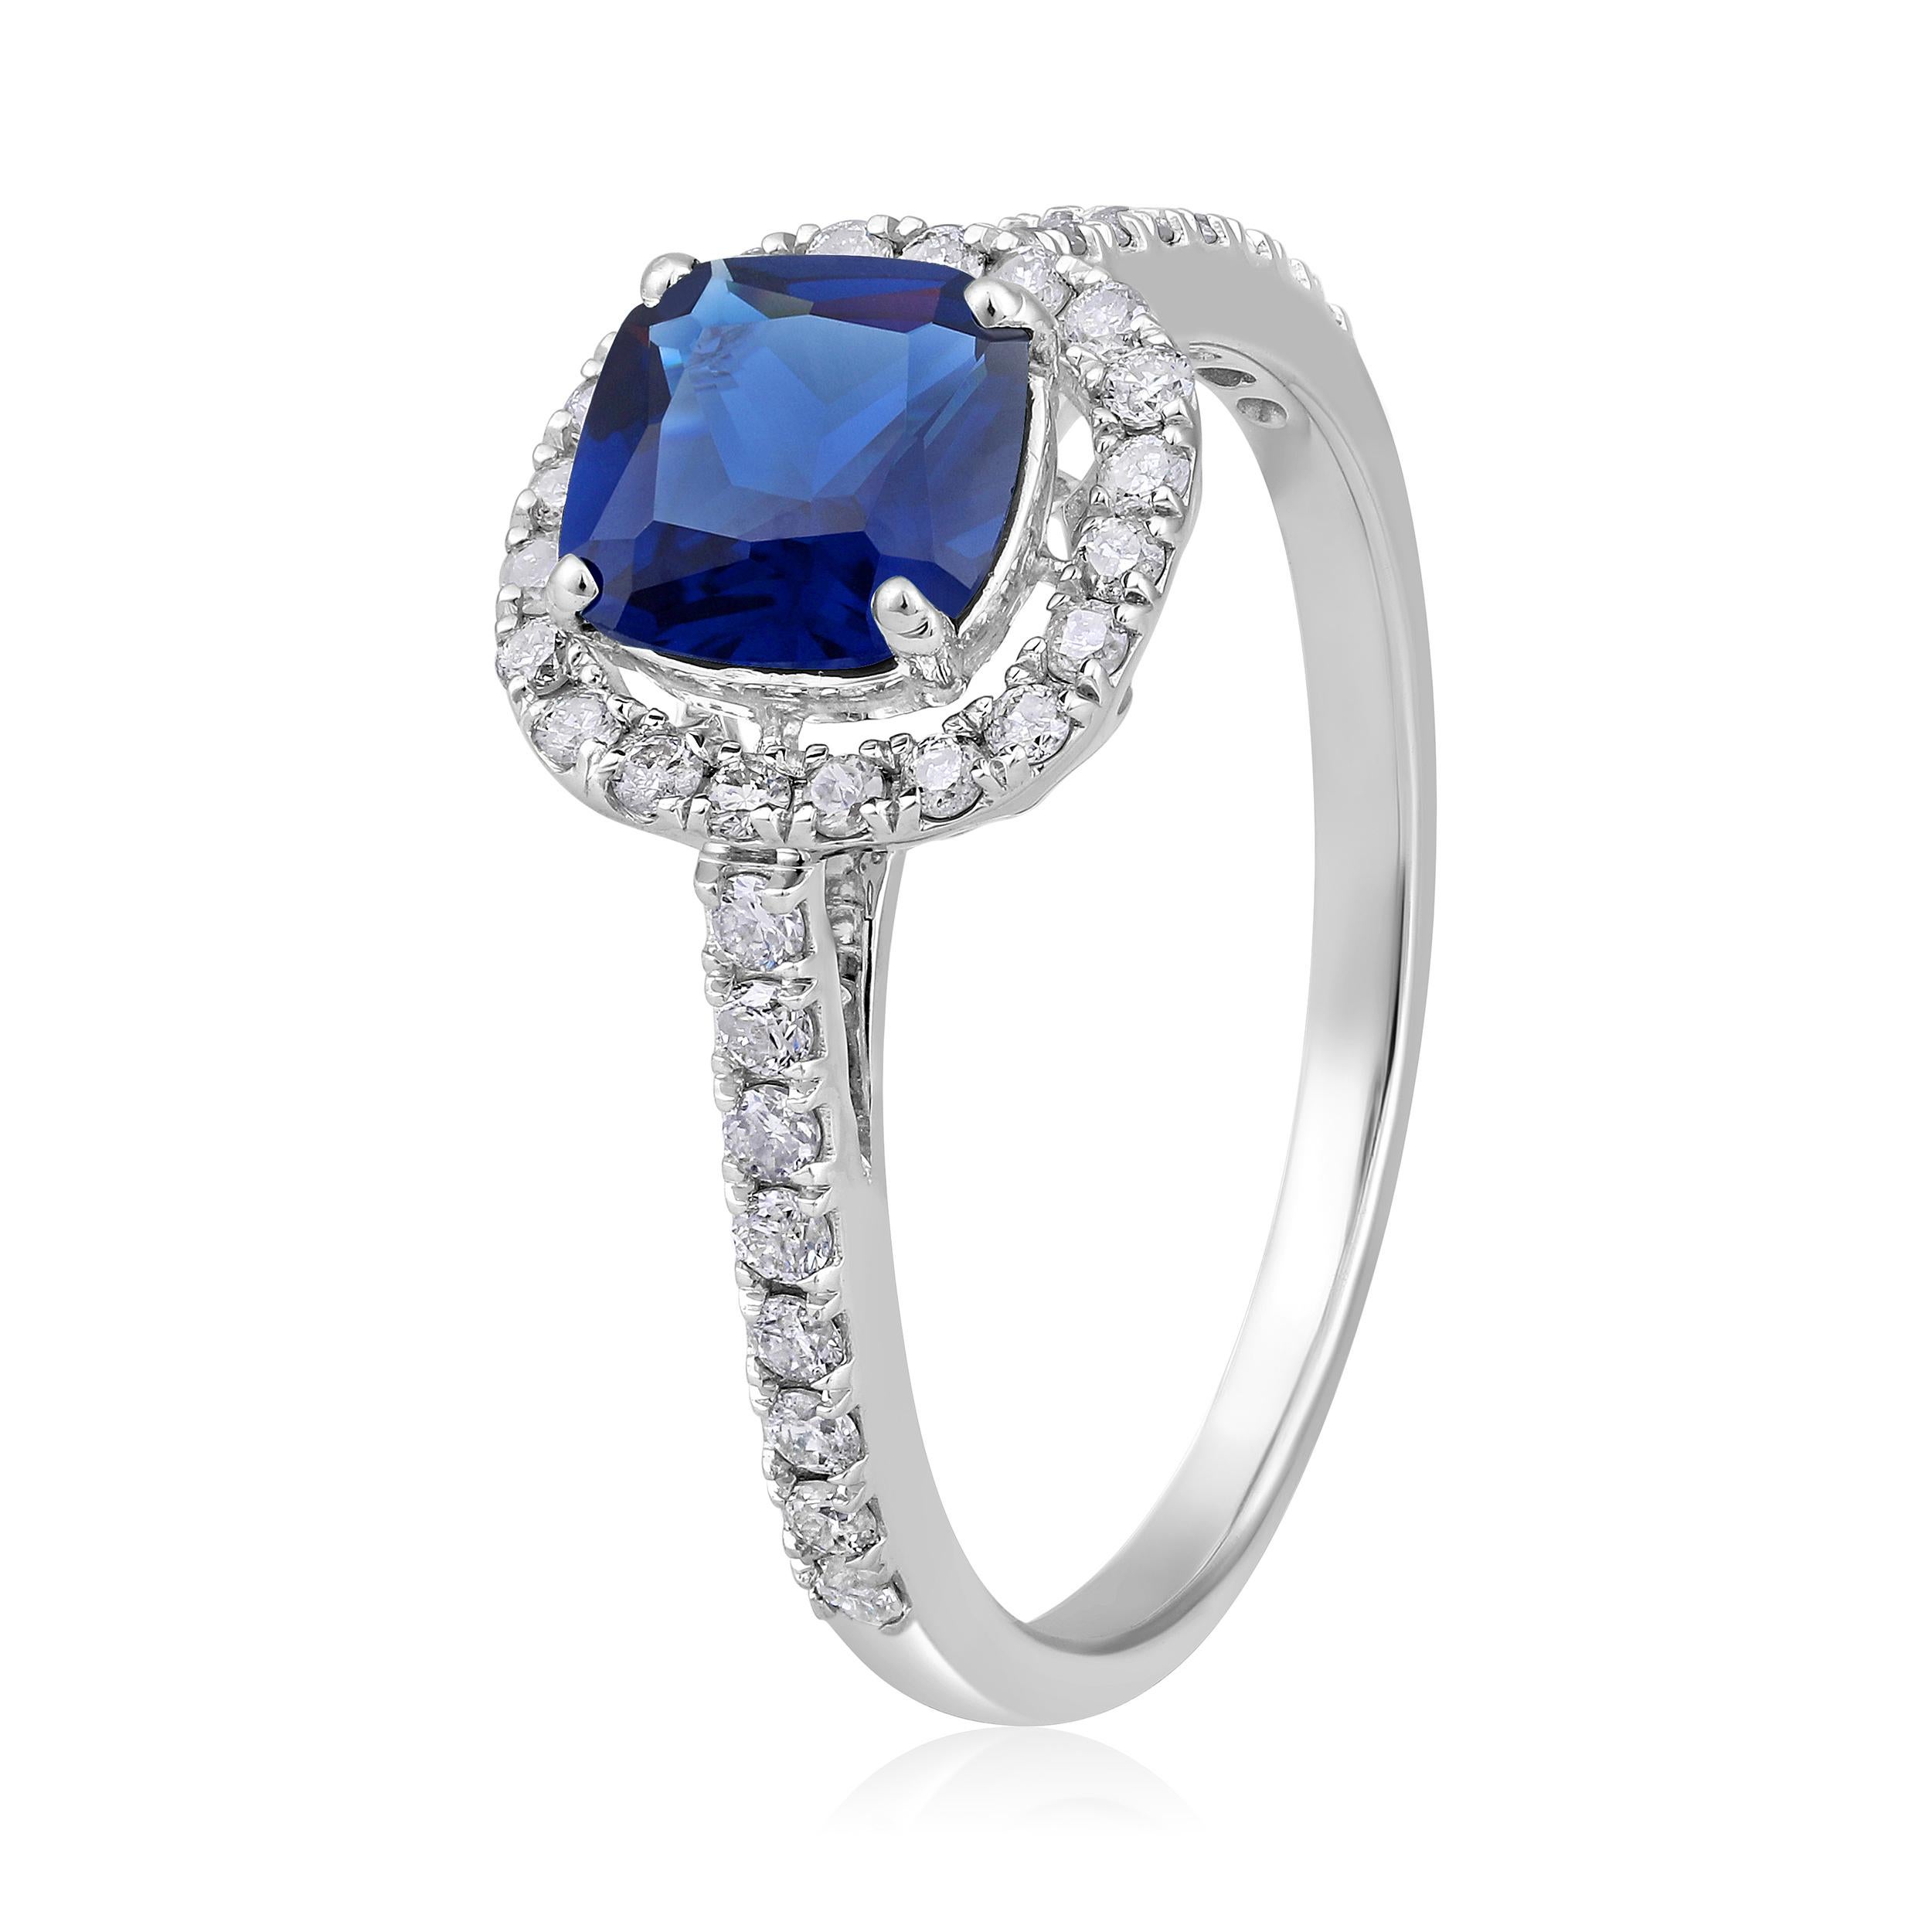 Ring Size: US 7 

Crafted in 1.72 grams of 10K White Gold, the ring contains 36 stones of Round Diamonds with a total of 0.323 carat in F-G color and I1-I2 clarity combined with 1 stone of Lab Created Sapphire Gemstone with a total of 0.848